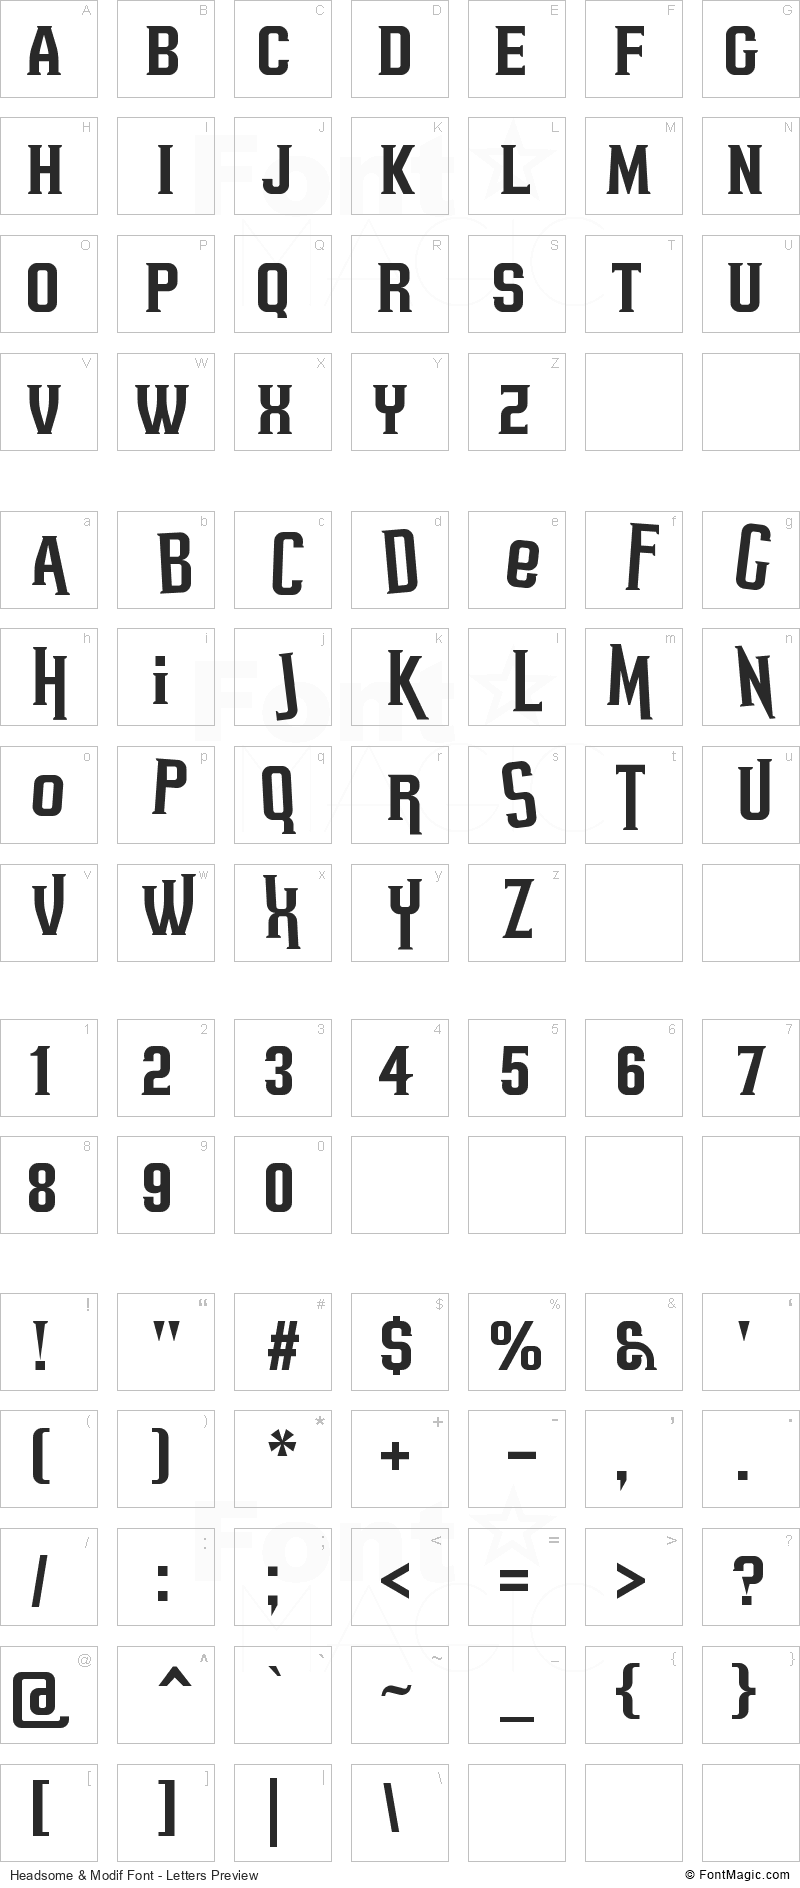 Headsome & Modif Font - All Latters Preview Chart